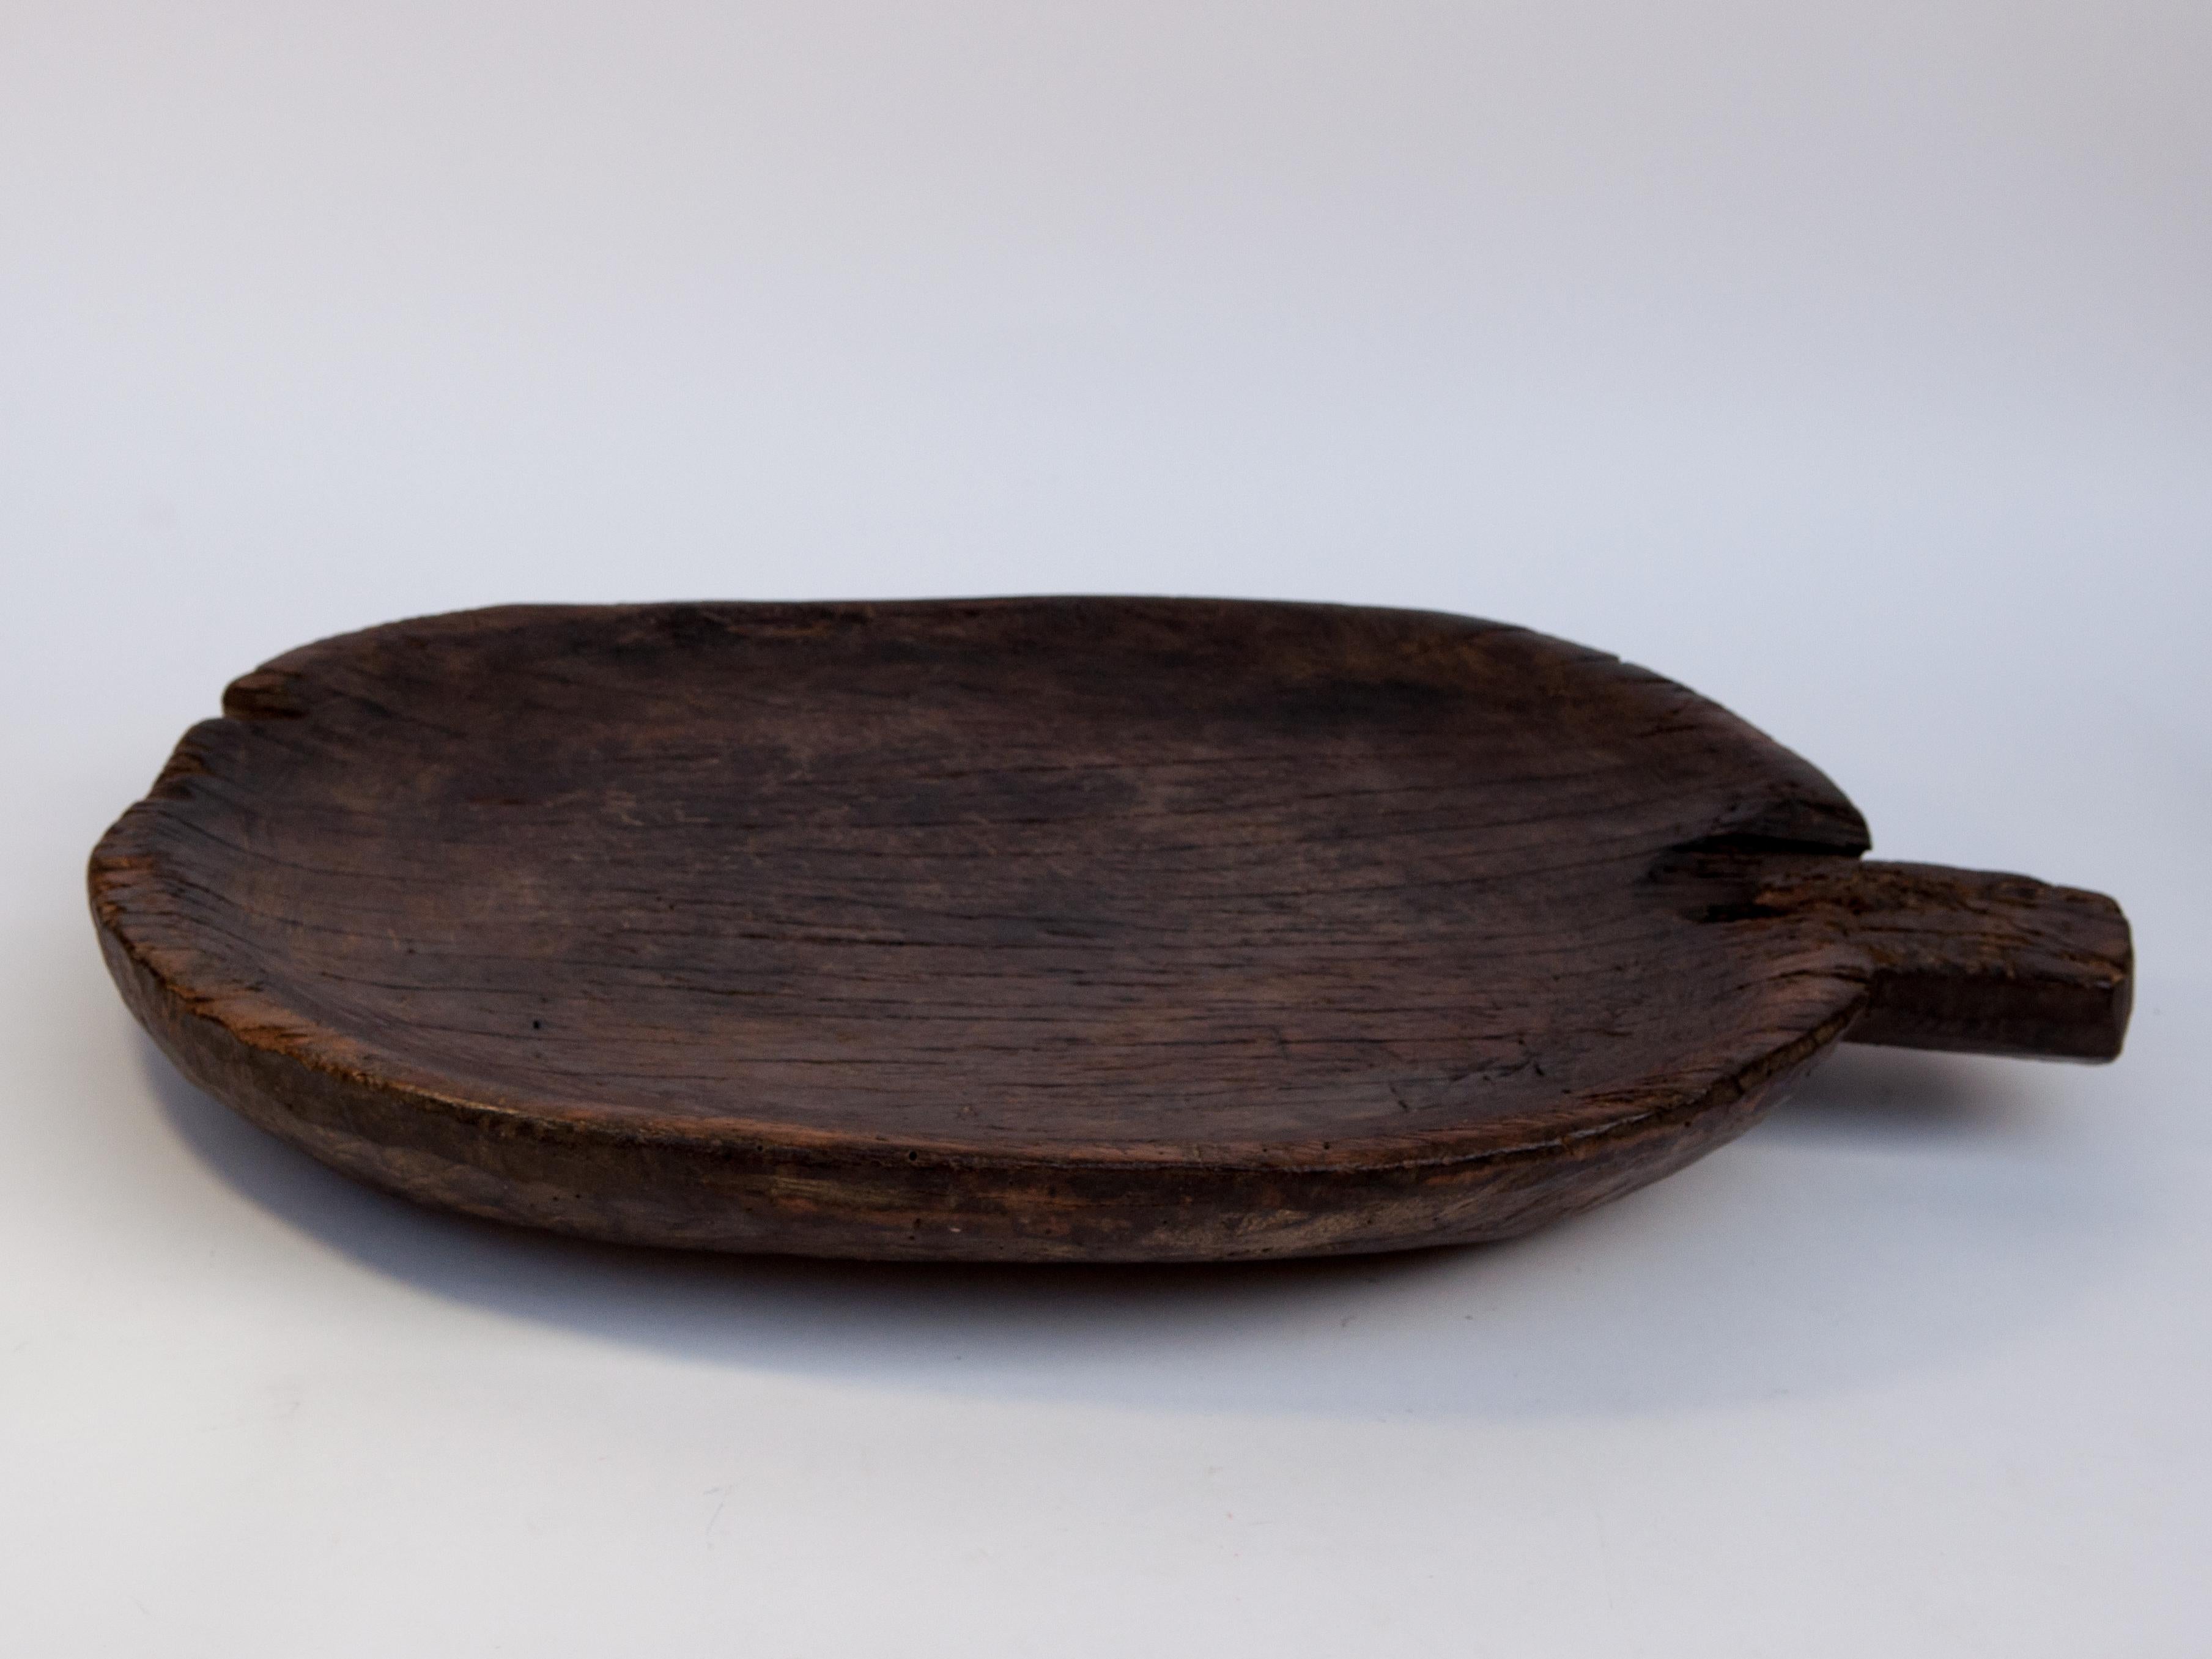 Vintage Tribal Flat Wooden Tray Large, from Nagaland, Early to Mid-20th Century.
Fashioned by hand from a single piece of local hardwood, this large flat wooden tray has a short wooden handle, and was used to dry and present food.
Note: we have put